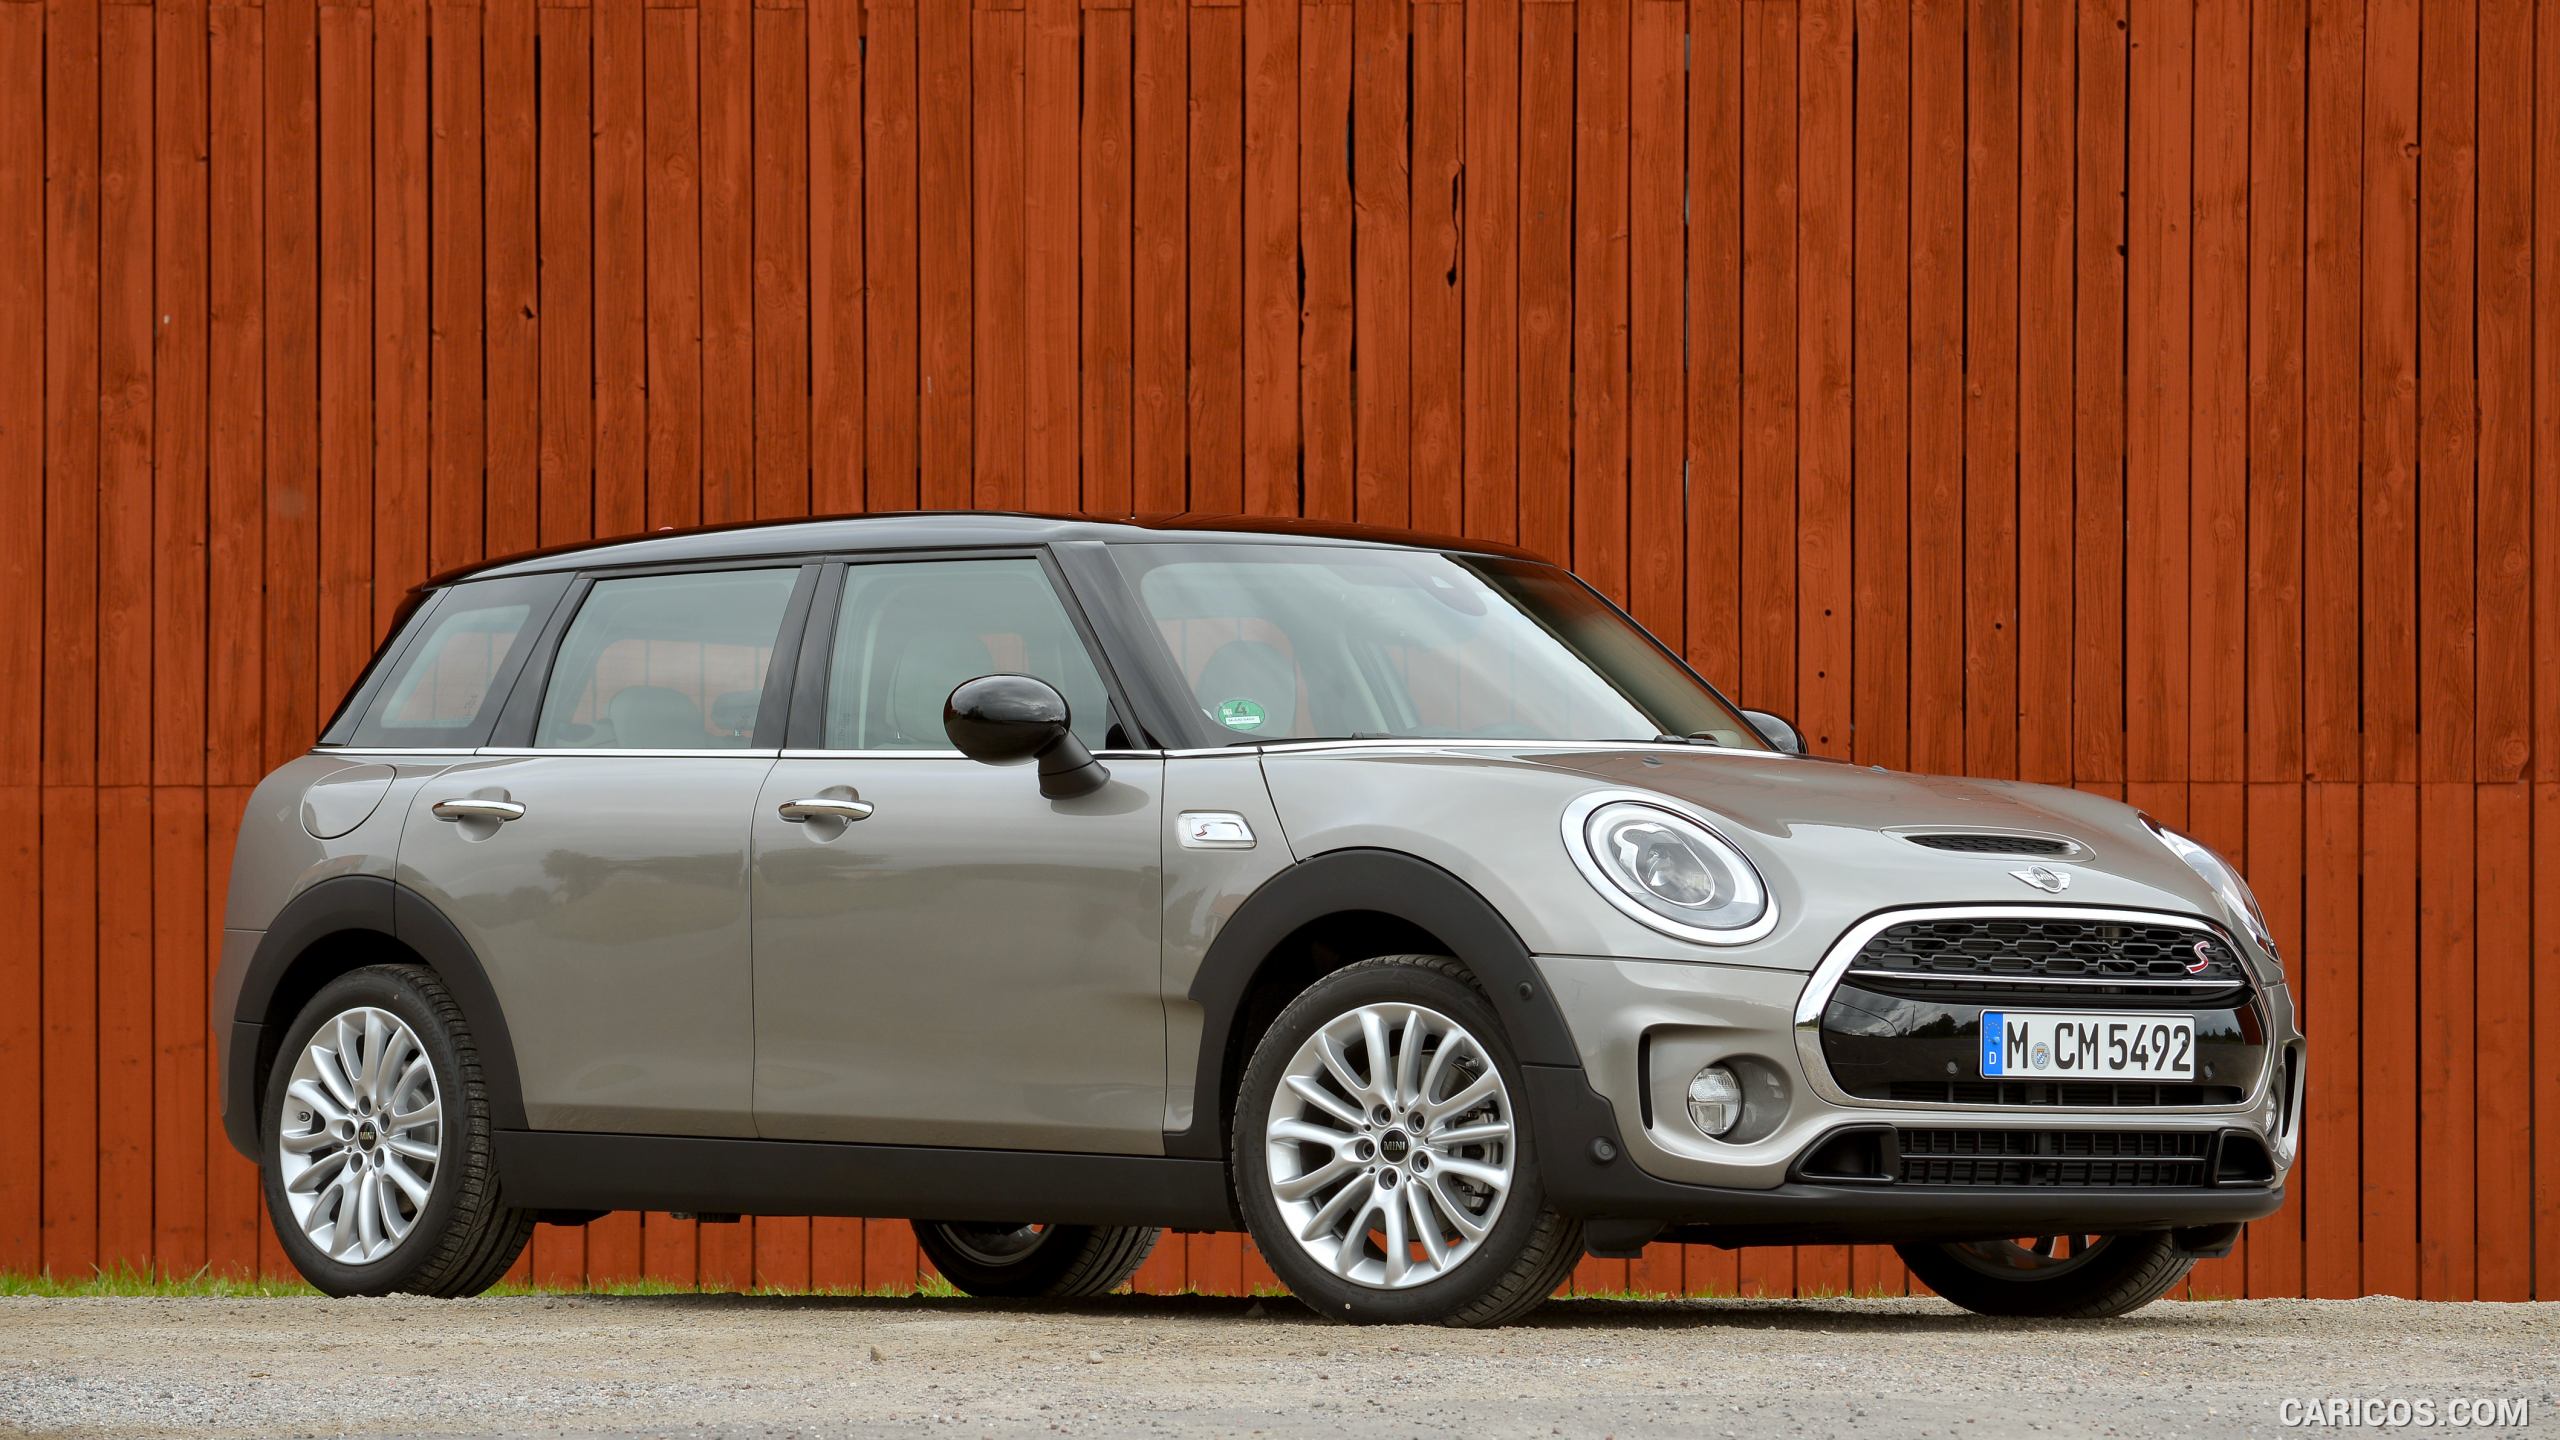 2016 MINI Cooper S Clubman in Metallic Melting Silver - Front, #184 of 380